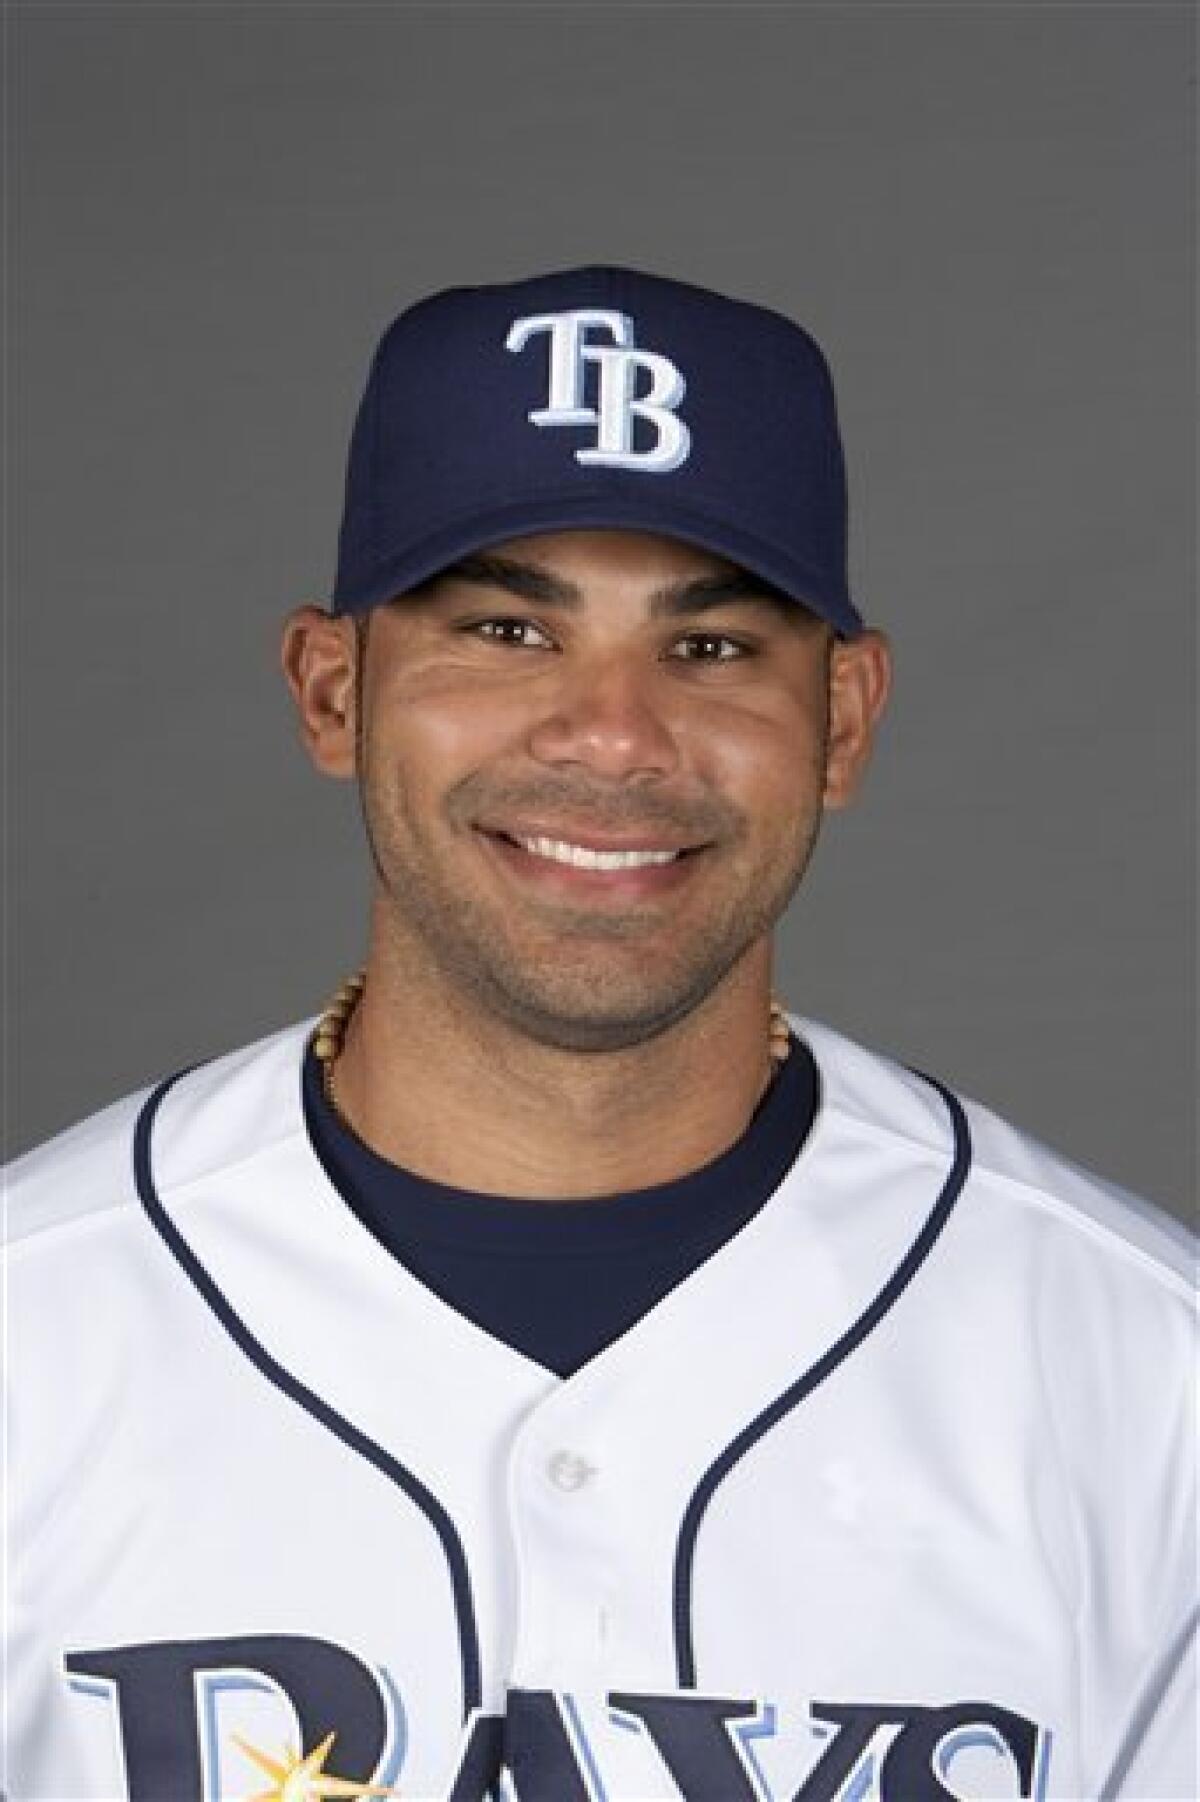 Carlos Pena is the fourth best position player in Tampa Bay Rays history